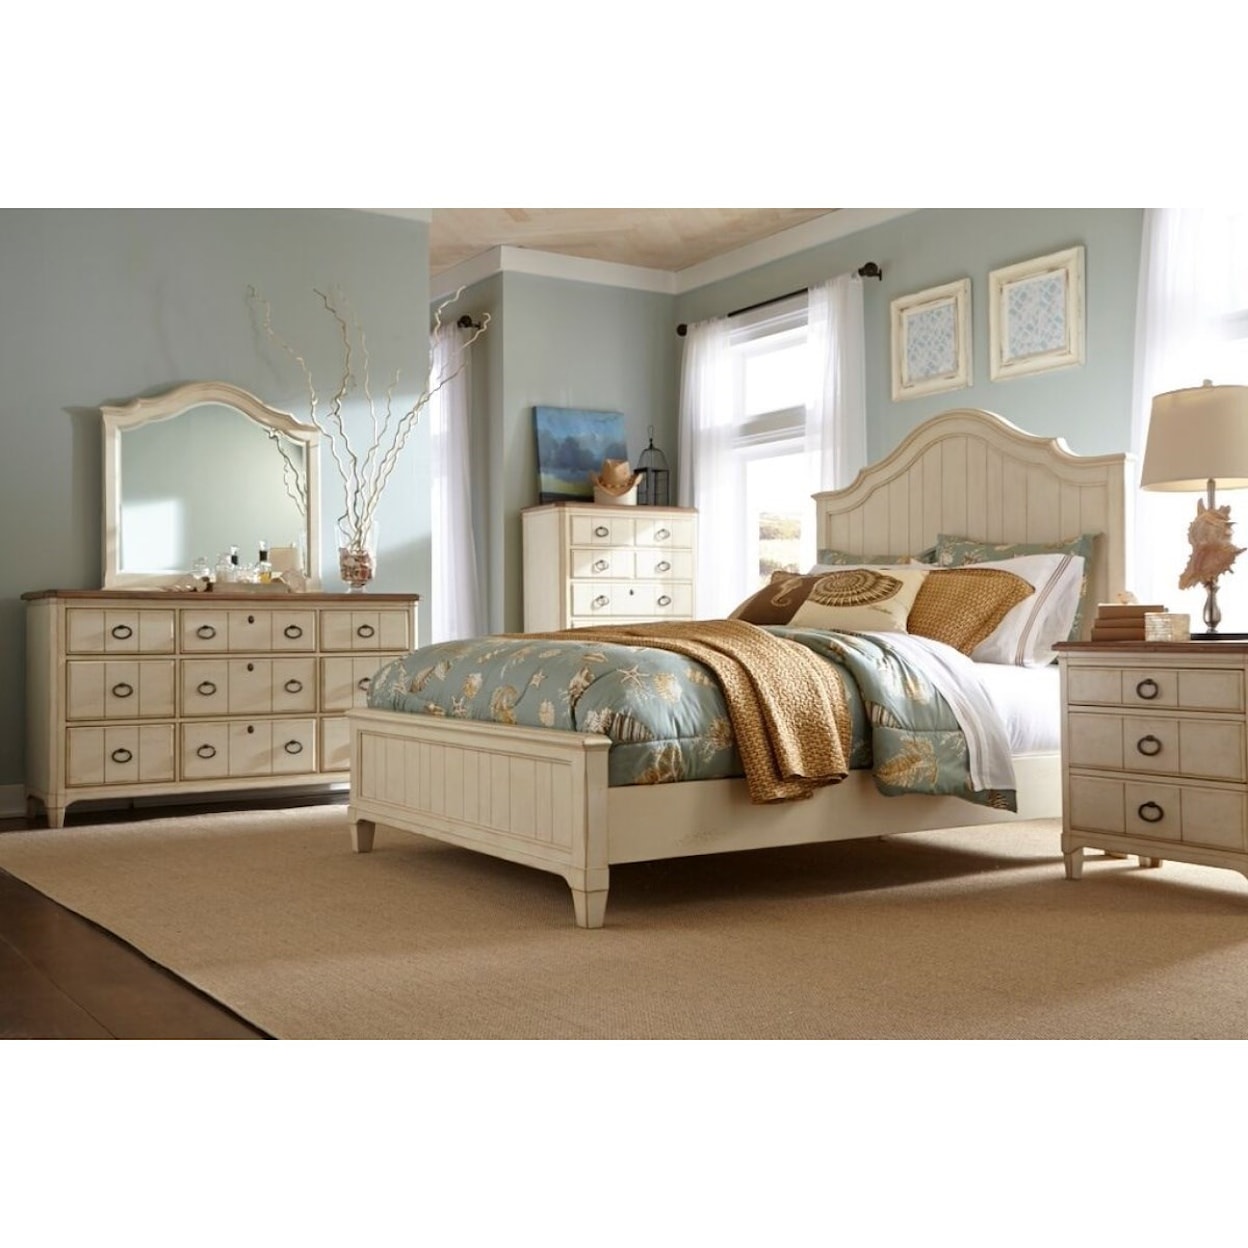 Panama Jack by Palmetto Home Millbrook King Bedroom Group